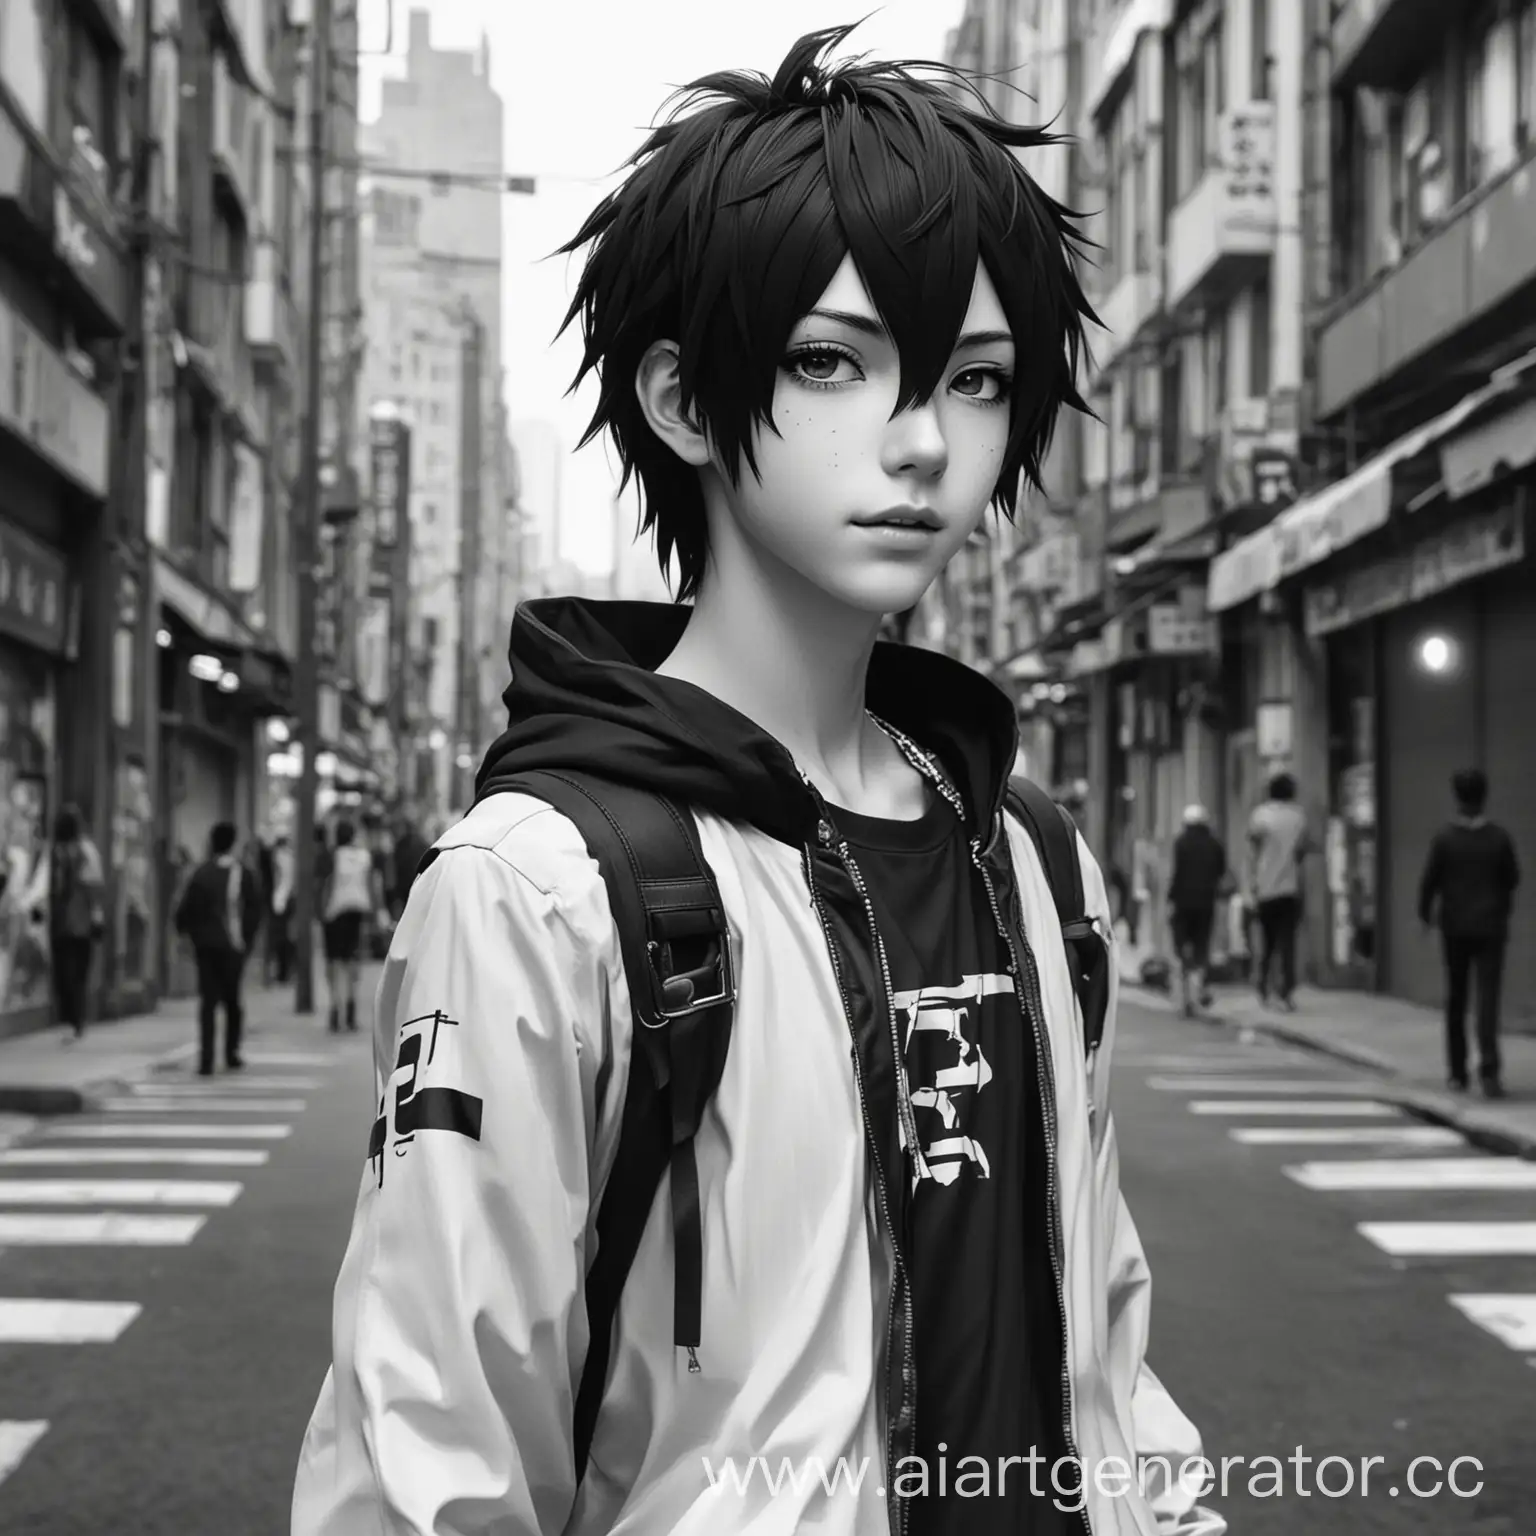 Anime-Boy-in-Urban-Setting-with-Vocaloid-Style-Outfit